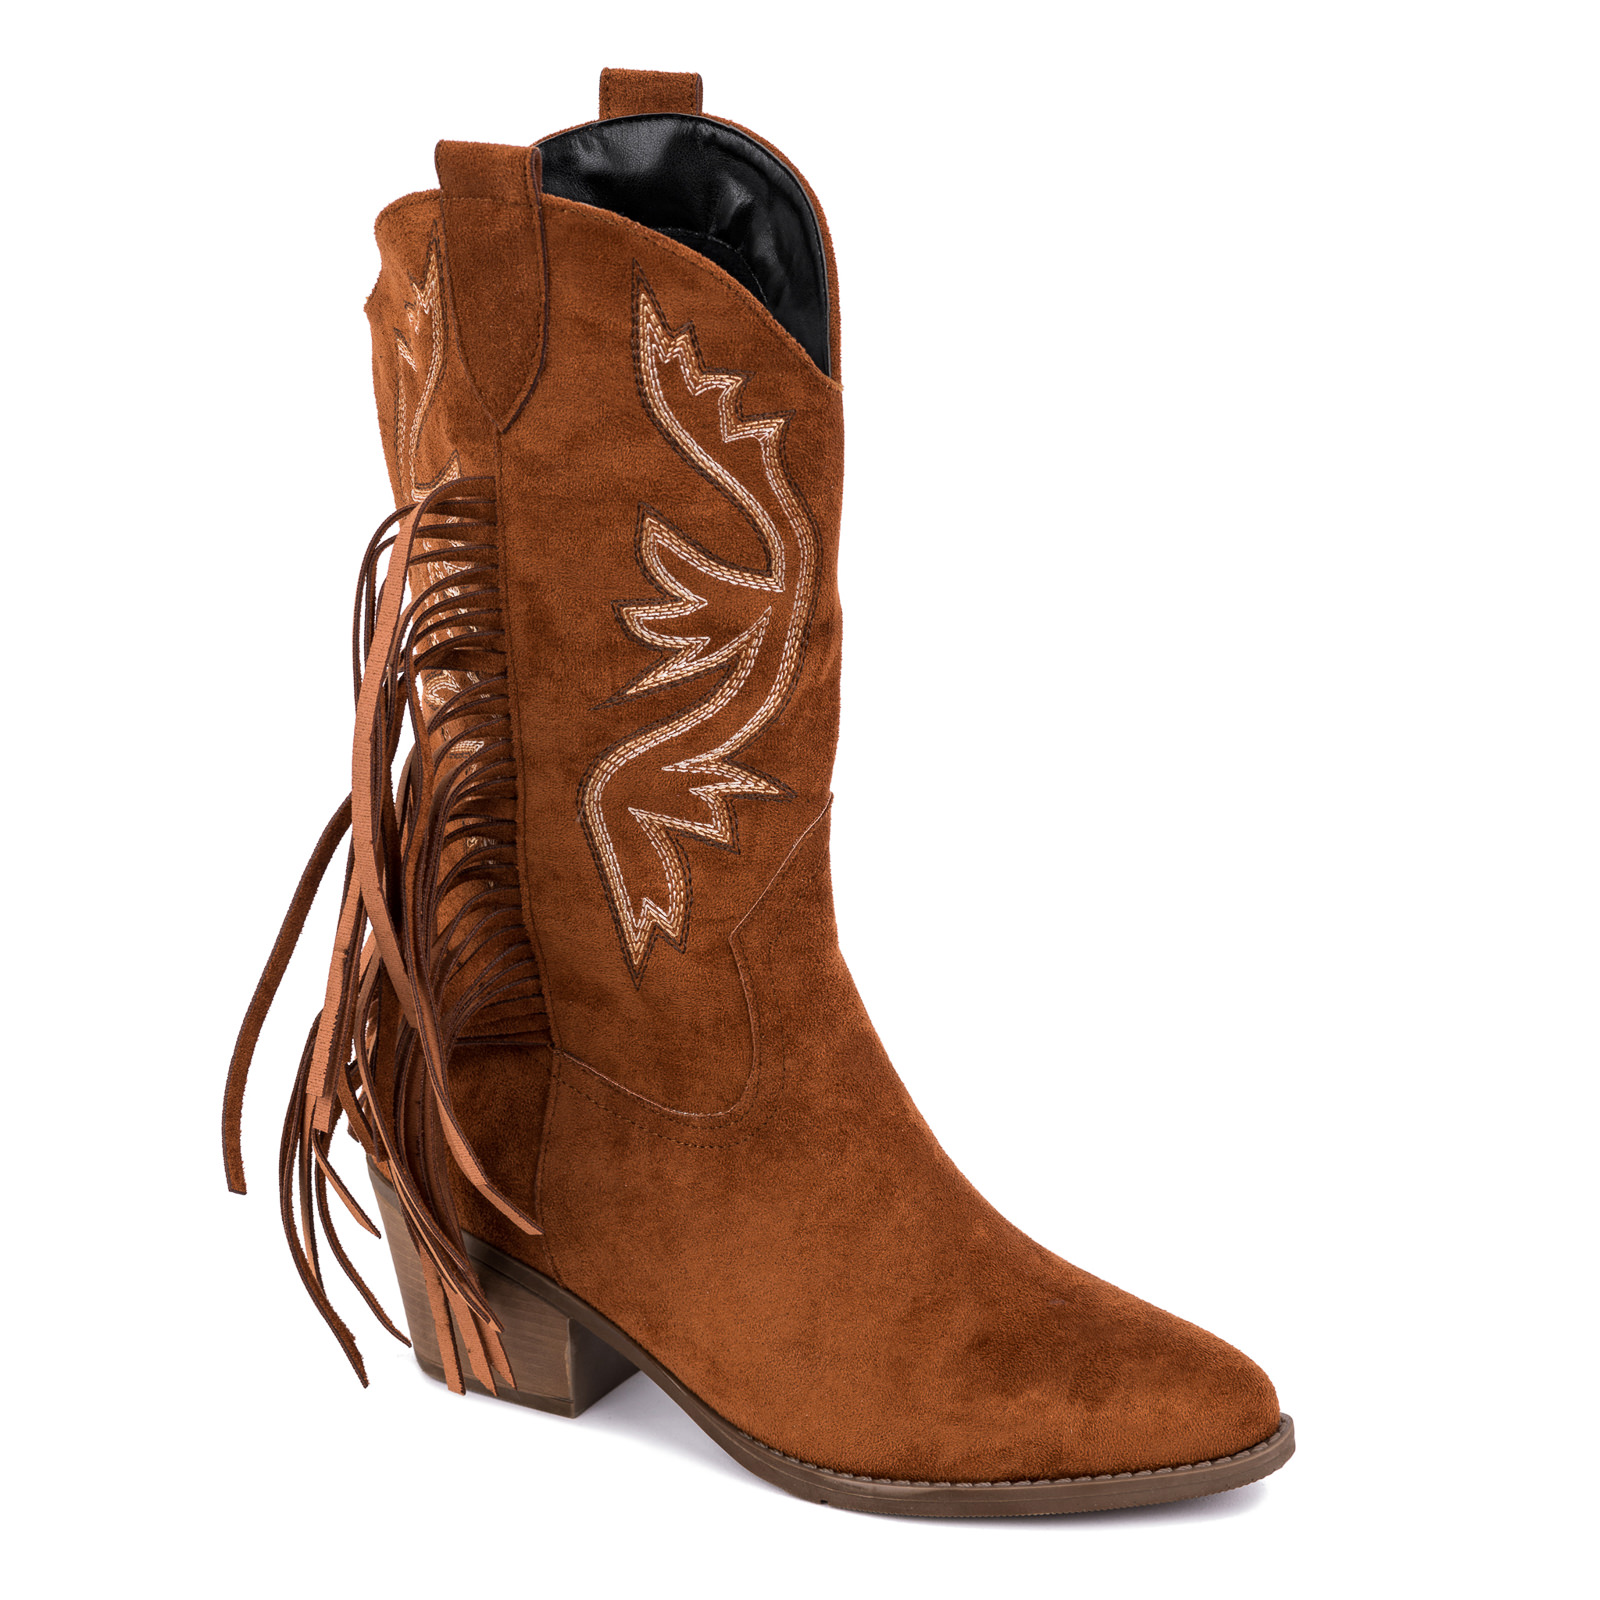 COW GIRL BOOTS WITH EMBRODERY AND FRINGE - CAMEL